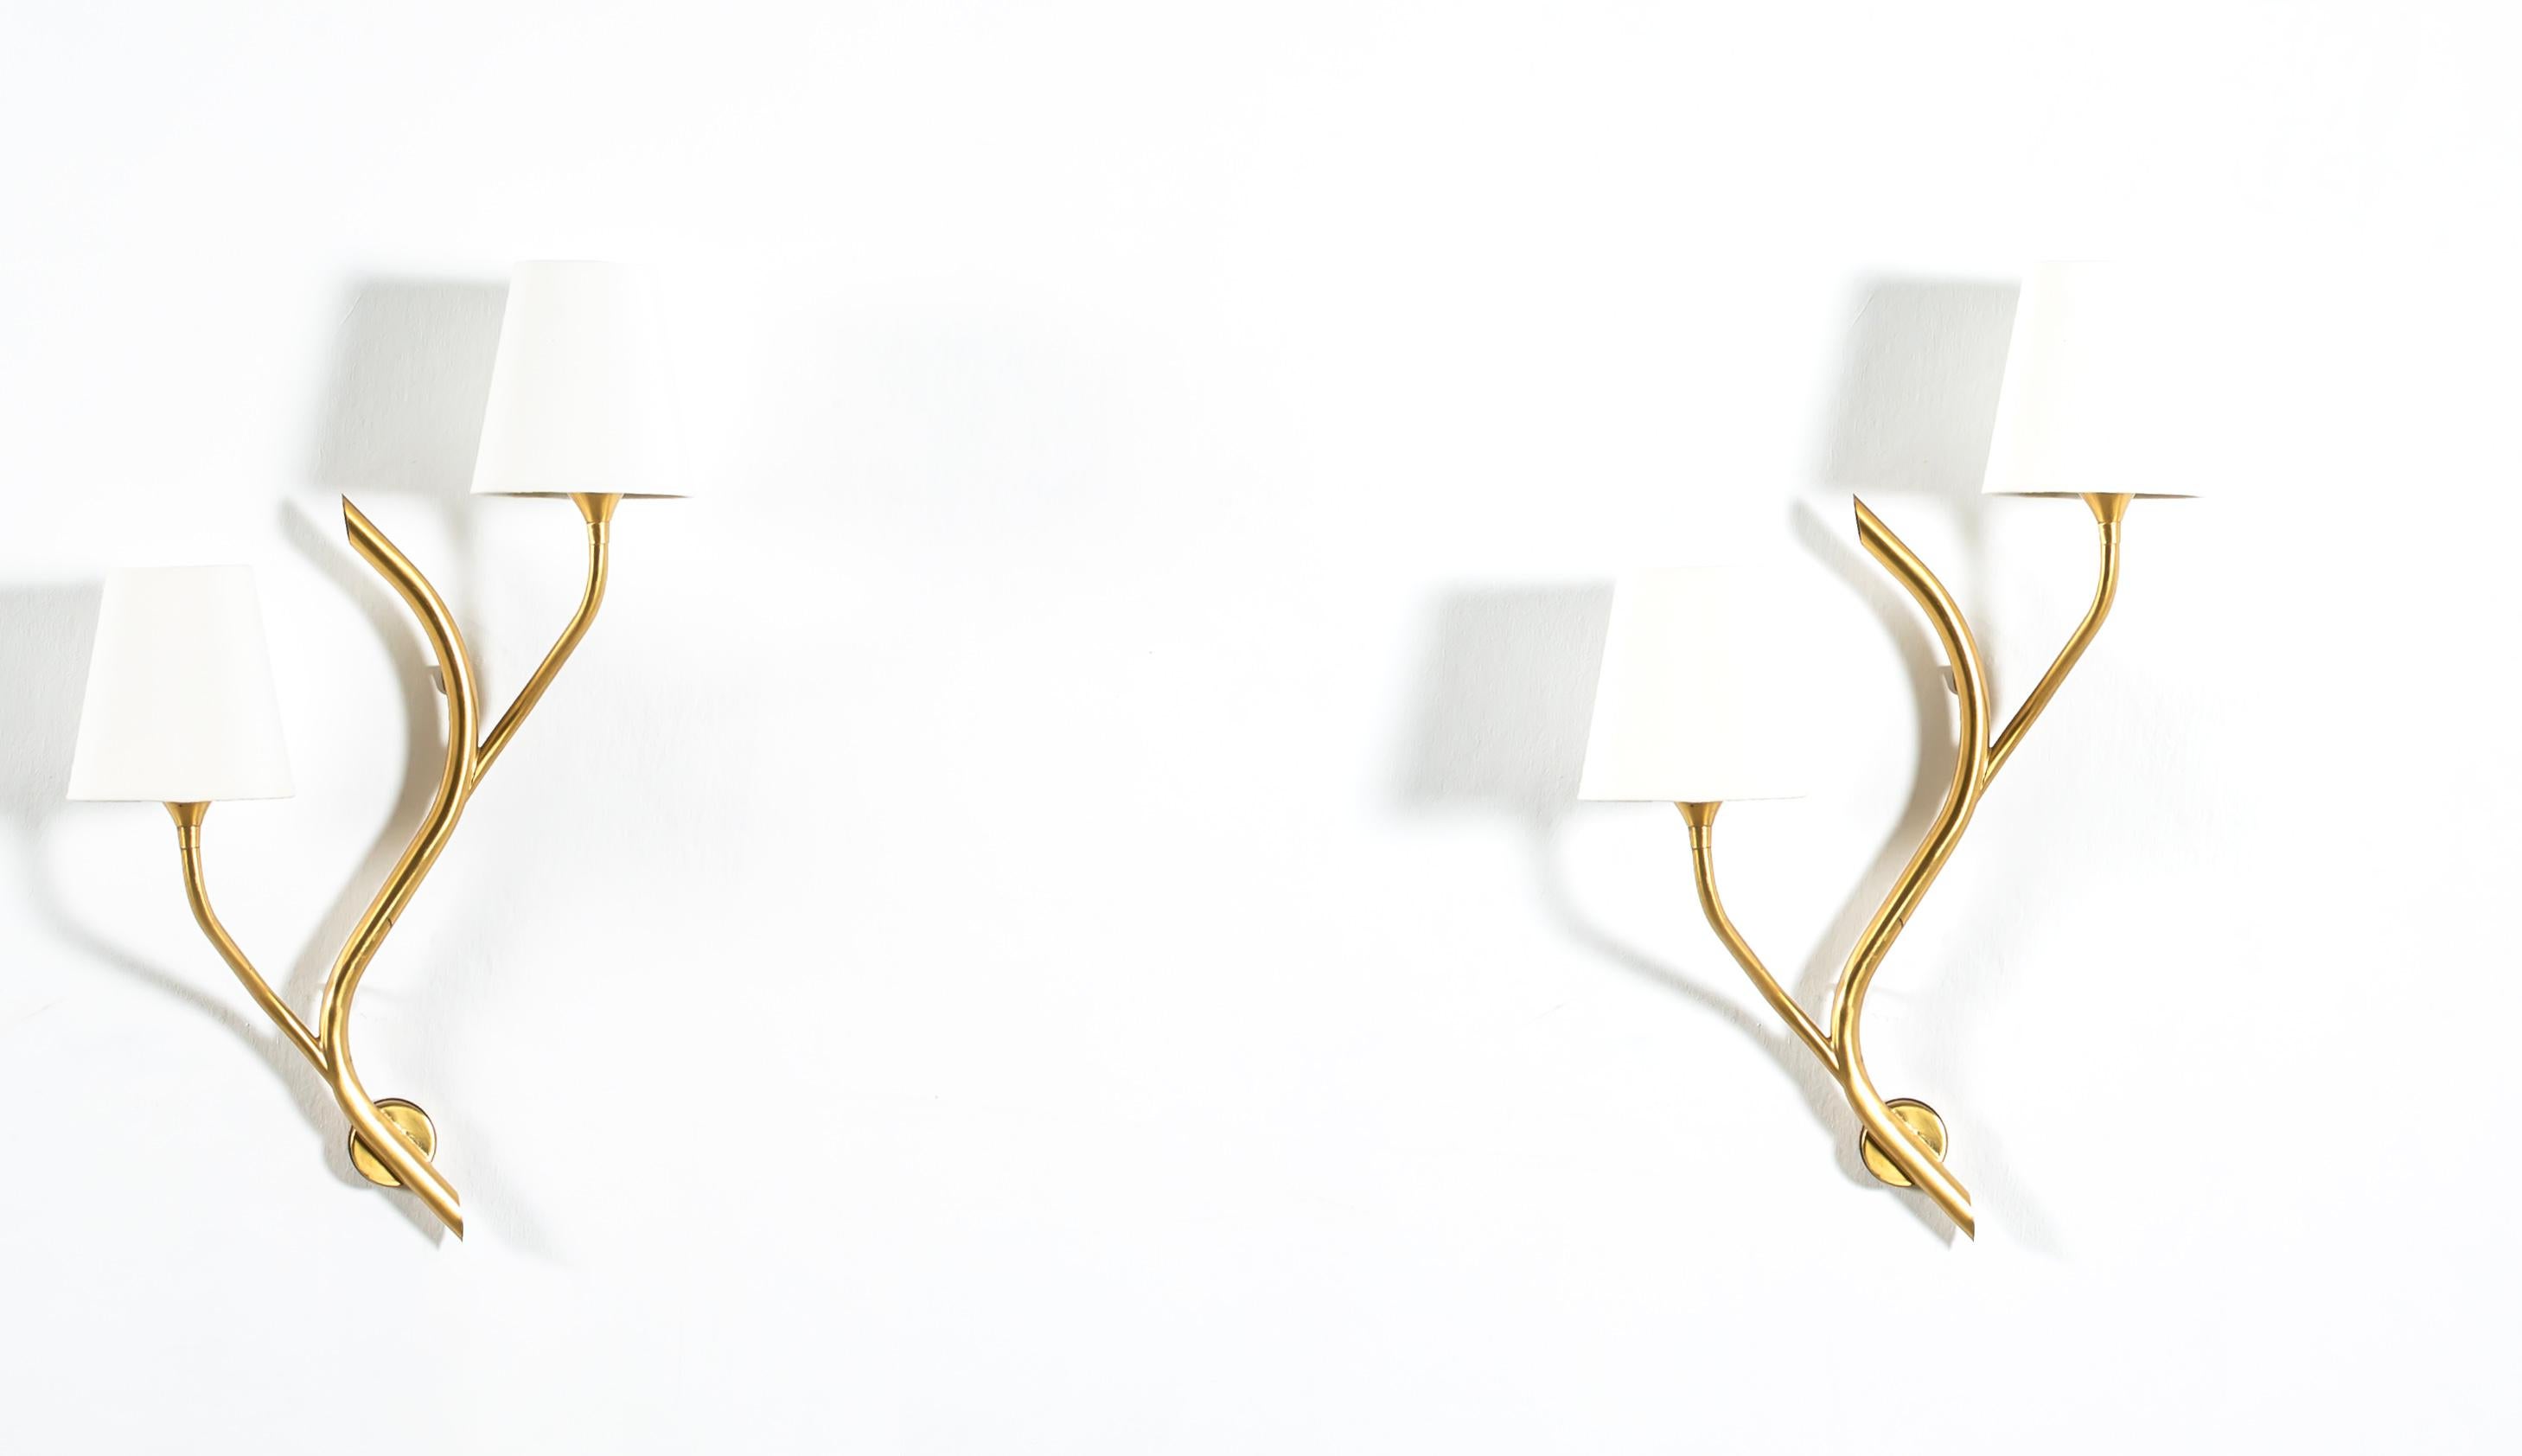 Sculptural and organically shaped pair of two-armed wall lamps in brass. The lamps are designed and made in Norway by Astra from circa 1960s second half. Both lamps are fully working and in very good vintage condition. Each lamp is fitted with two